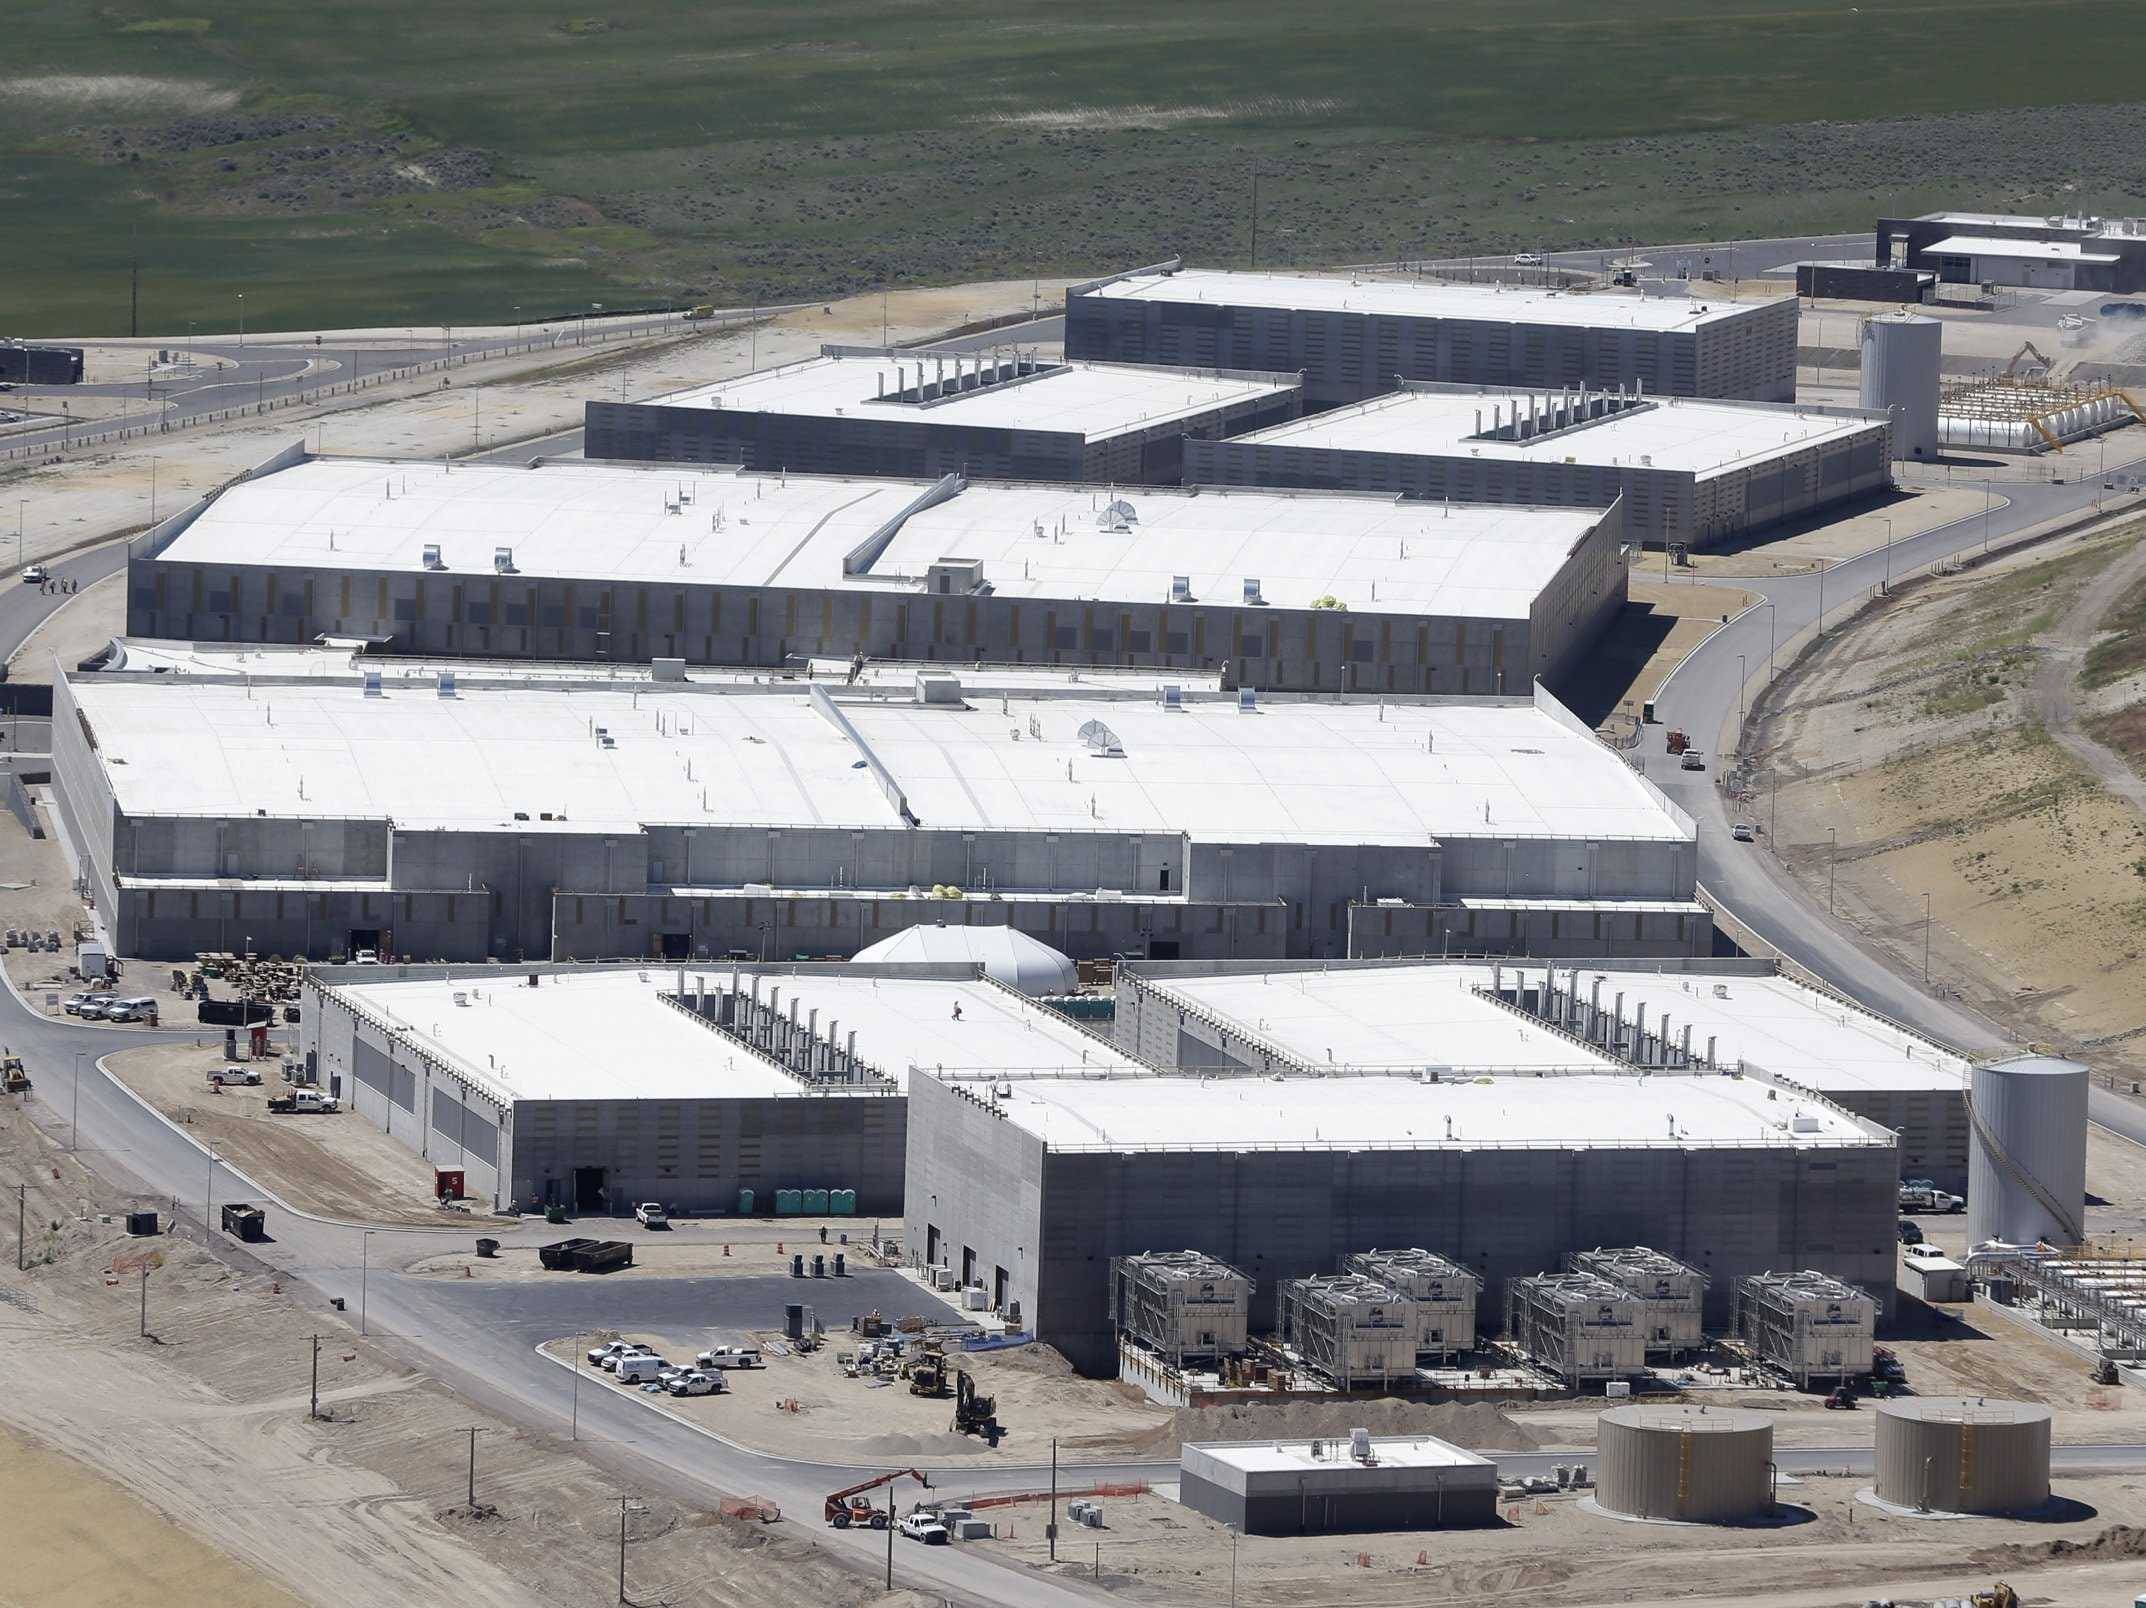 heres-the-2-billion-facility-where-the-nsa-will-store-and-analyze-your-communications.jpg